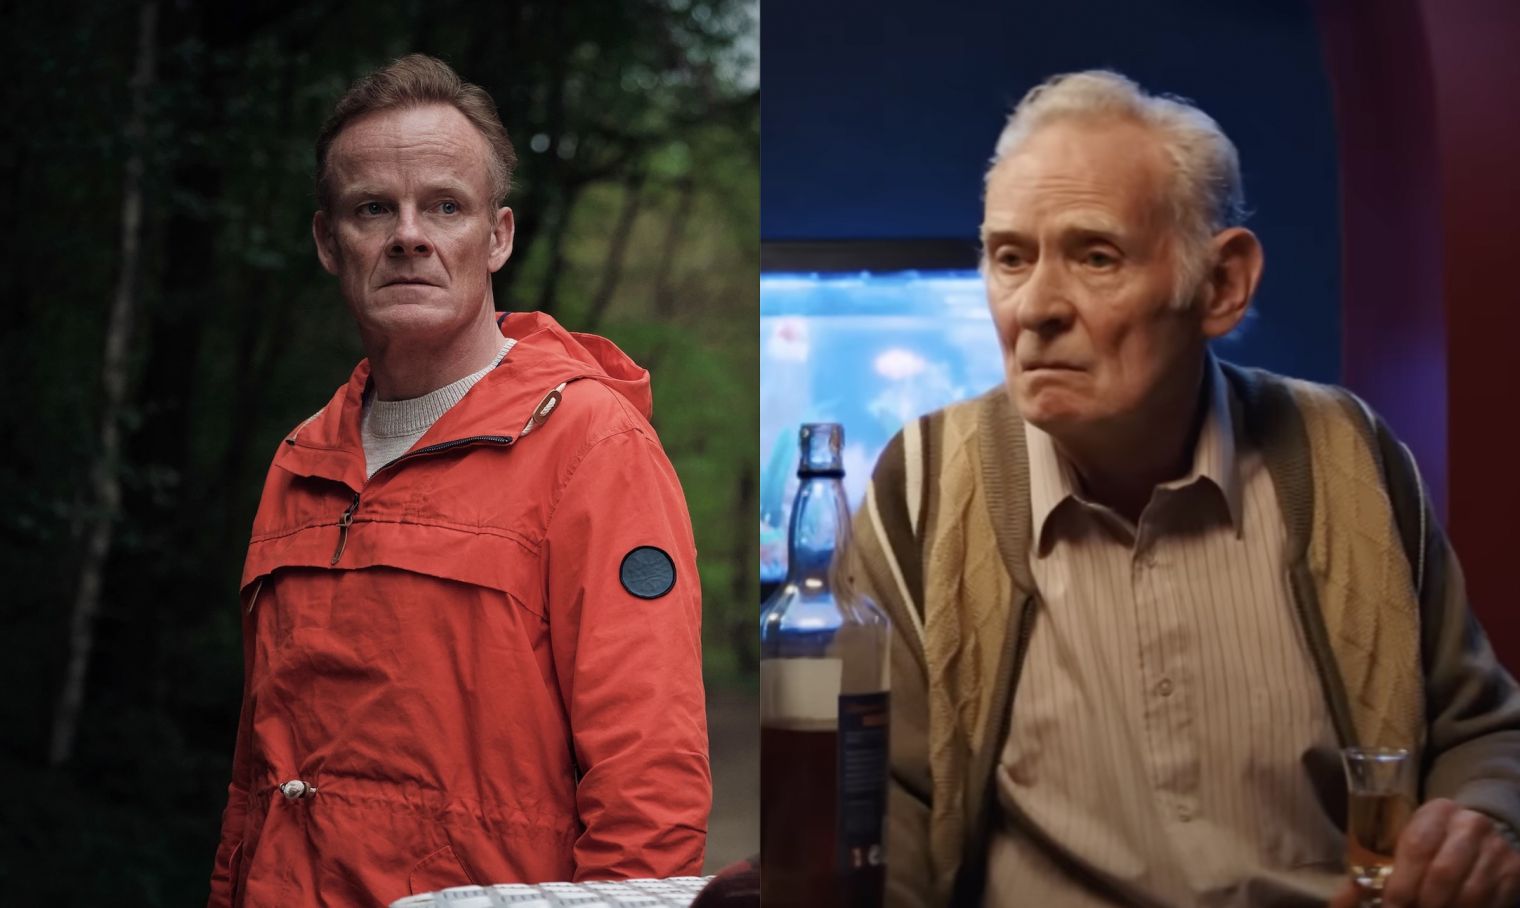 The Following Events Are Based on a Pack of Lies, starring Alistair Petrie and Karl Johnson, will premiere on Tuesday 29th August at 9pm on BBC One